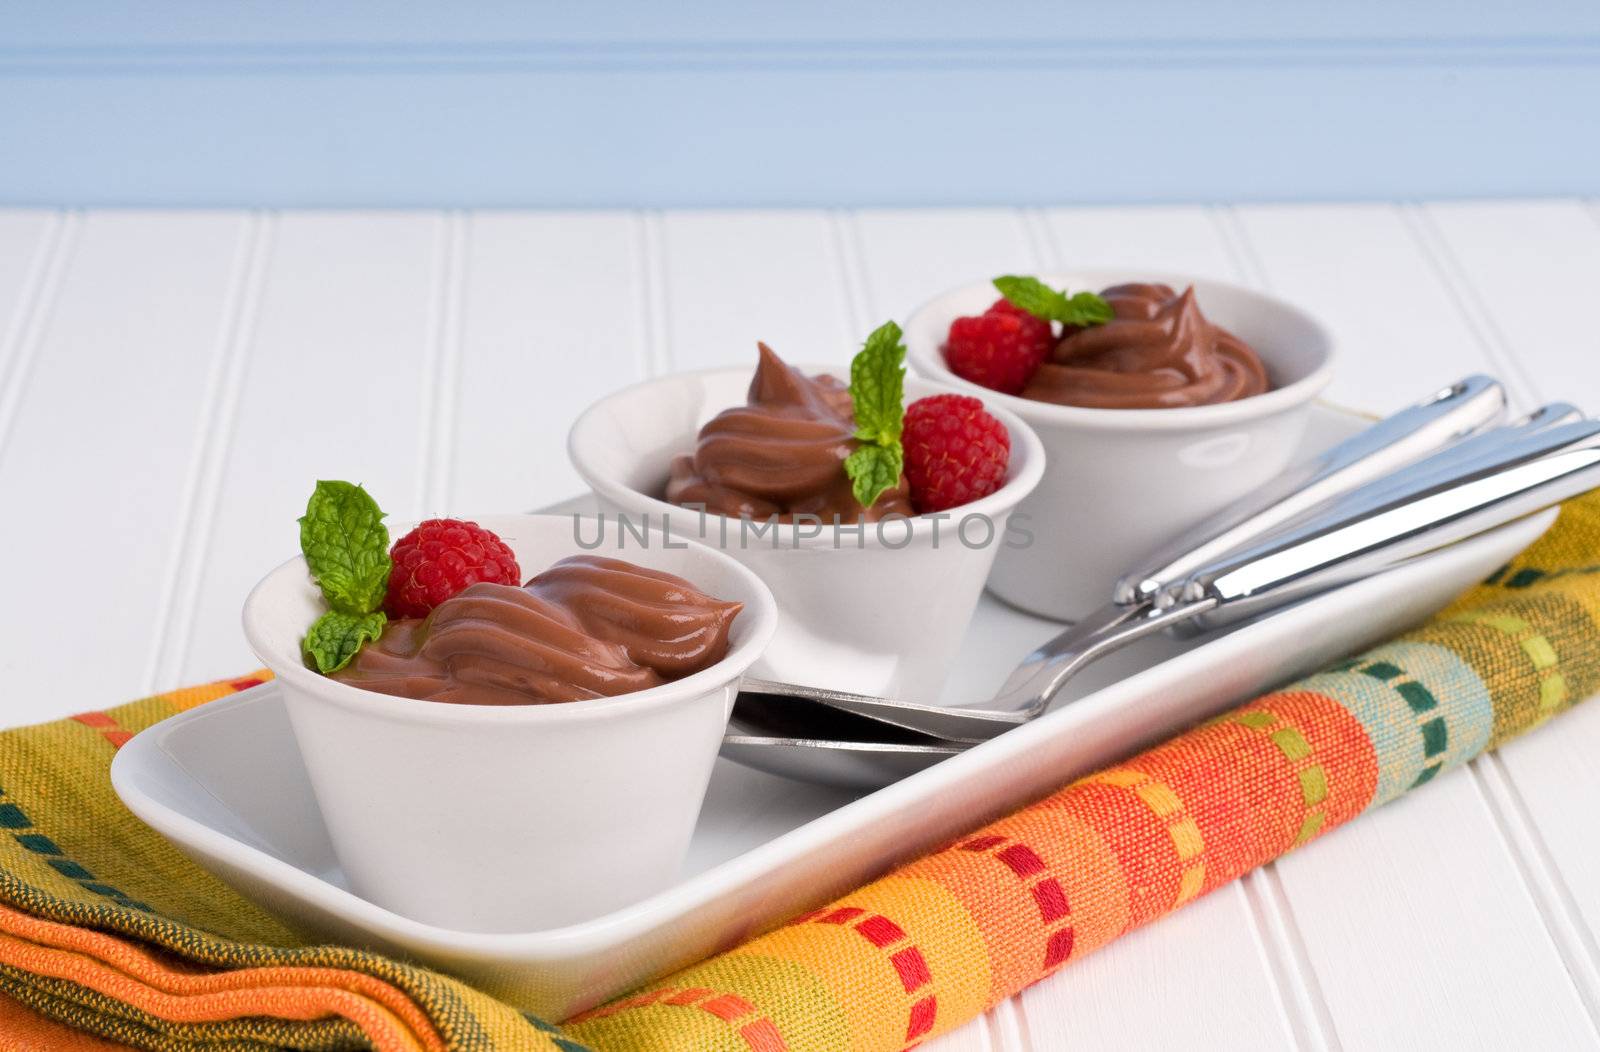 Chocolate Pudding by billberryphotography